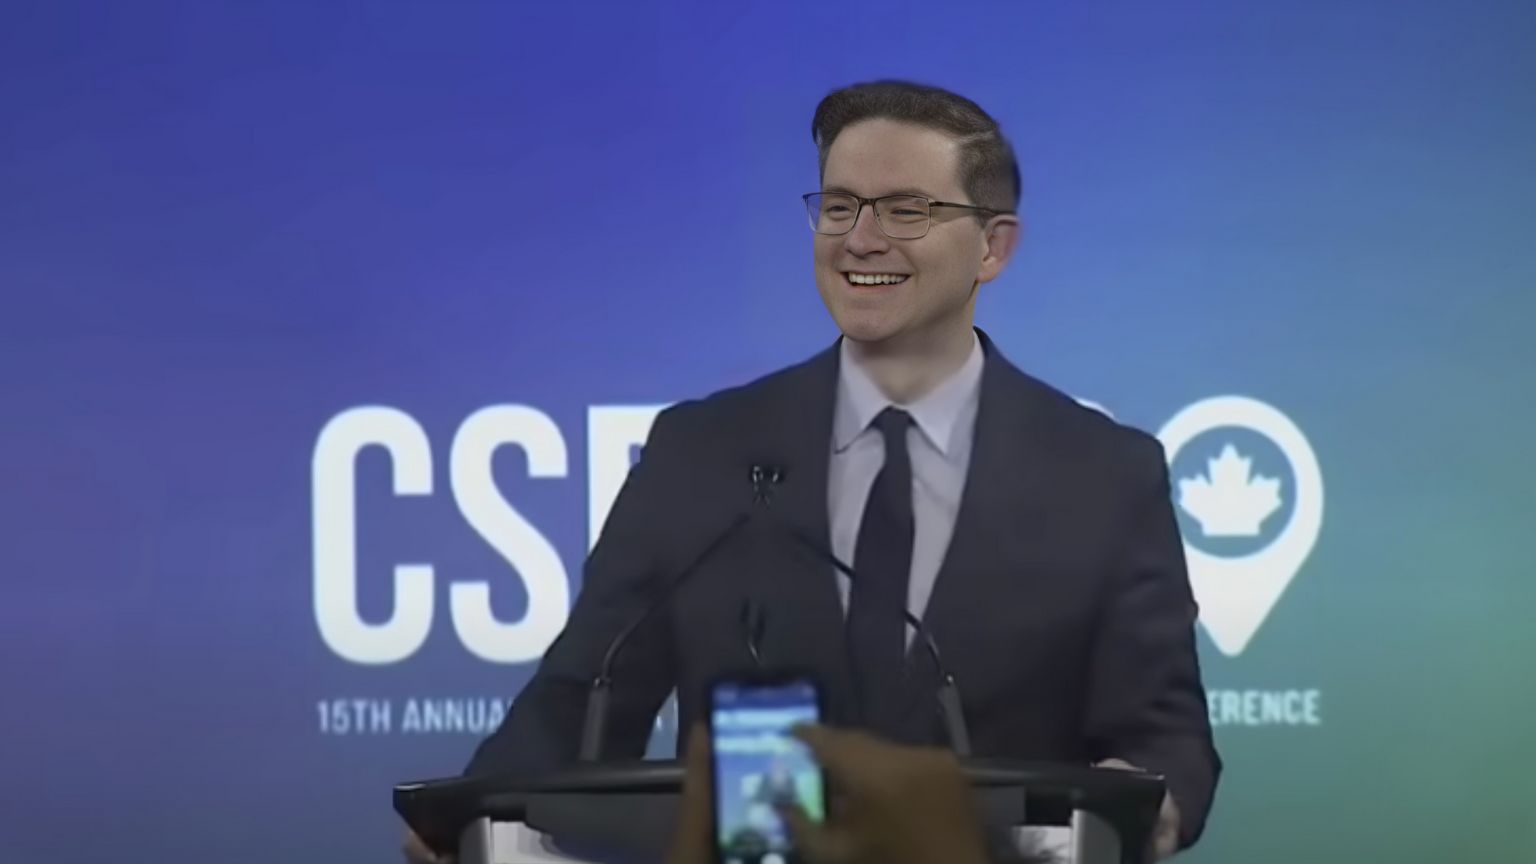 Canada’s Conservative leader promises to repeal censorship bill if elected